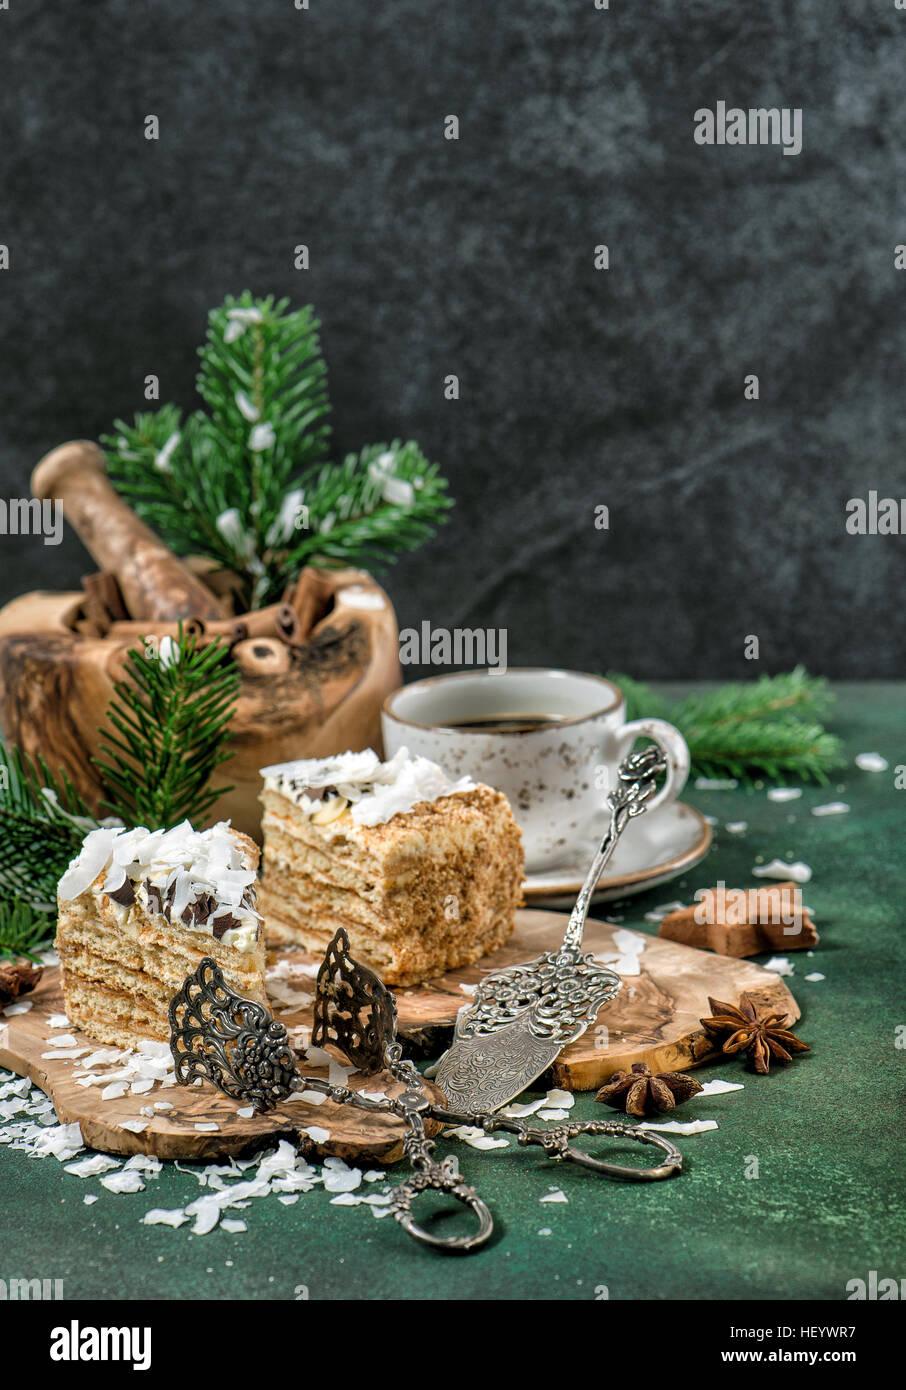 Honey cake with spices and Christmas decoration. Festive sweet food. Vintage style toned picture Stock Photo